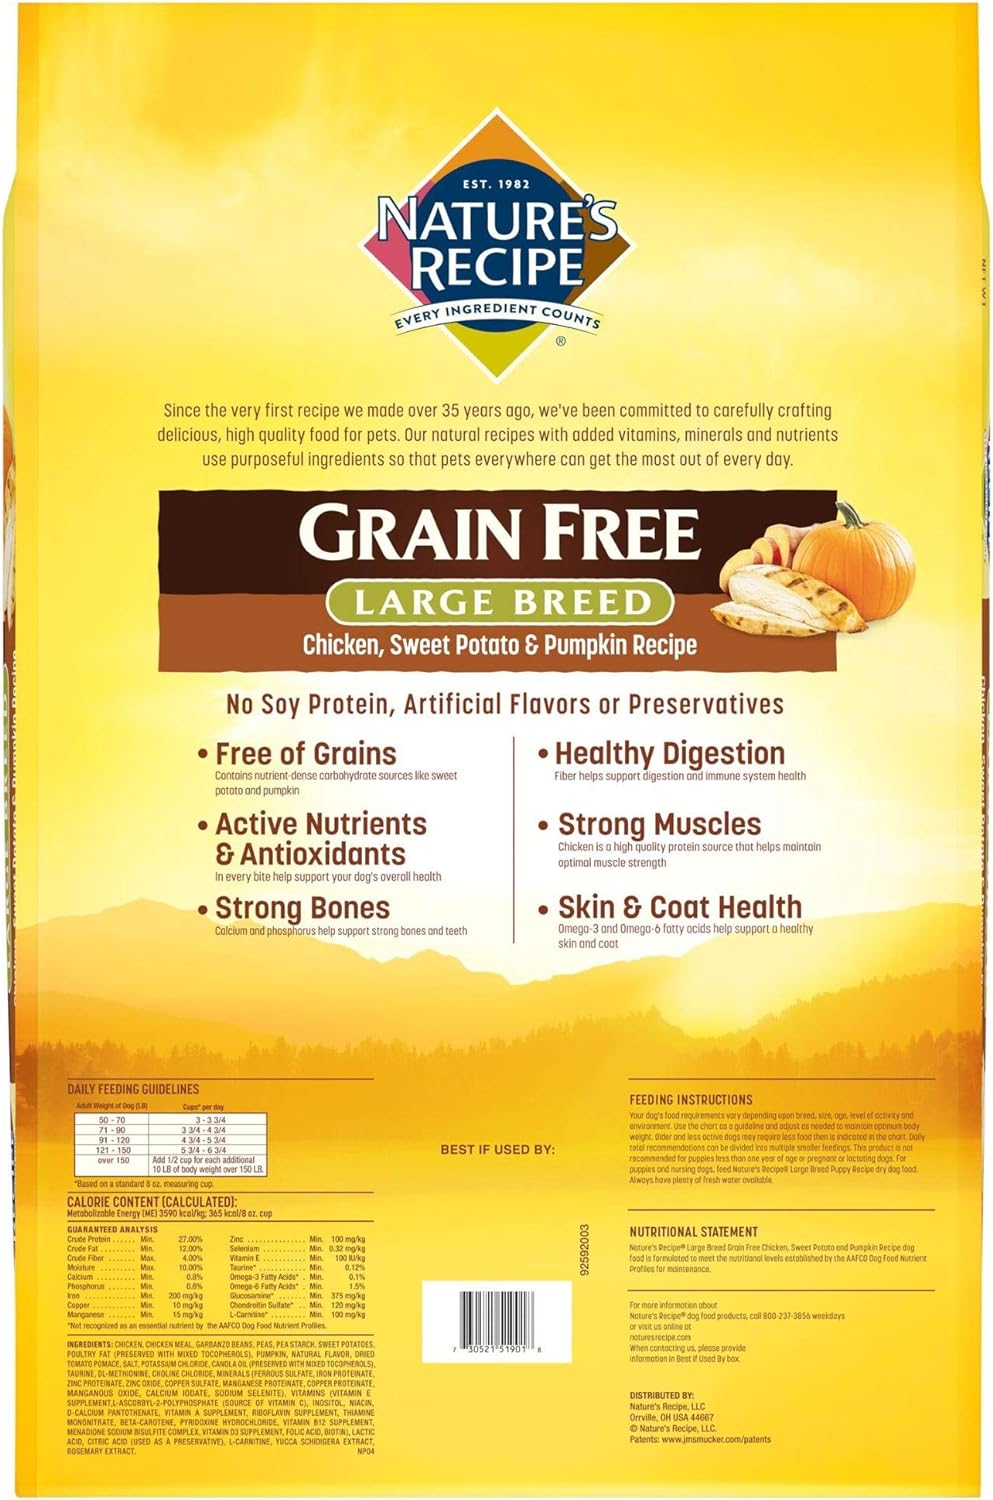 Nature’s Recipe Large Breed Grain-Free Easy to Digest Chicken, Sweet Potato, & Pumpkin Recipe Dry Dog Food – Gallery Image 3